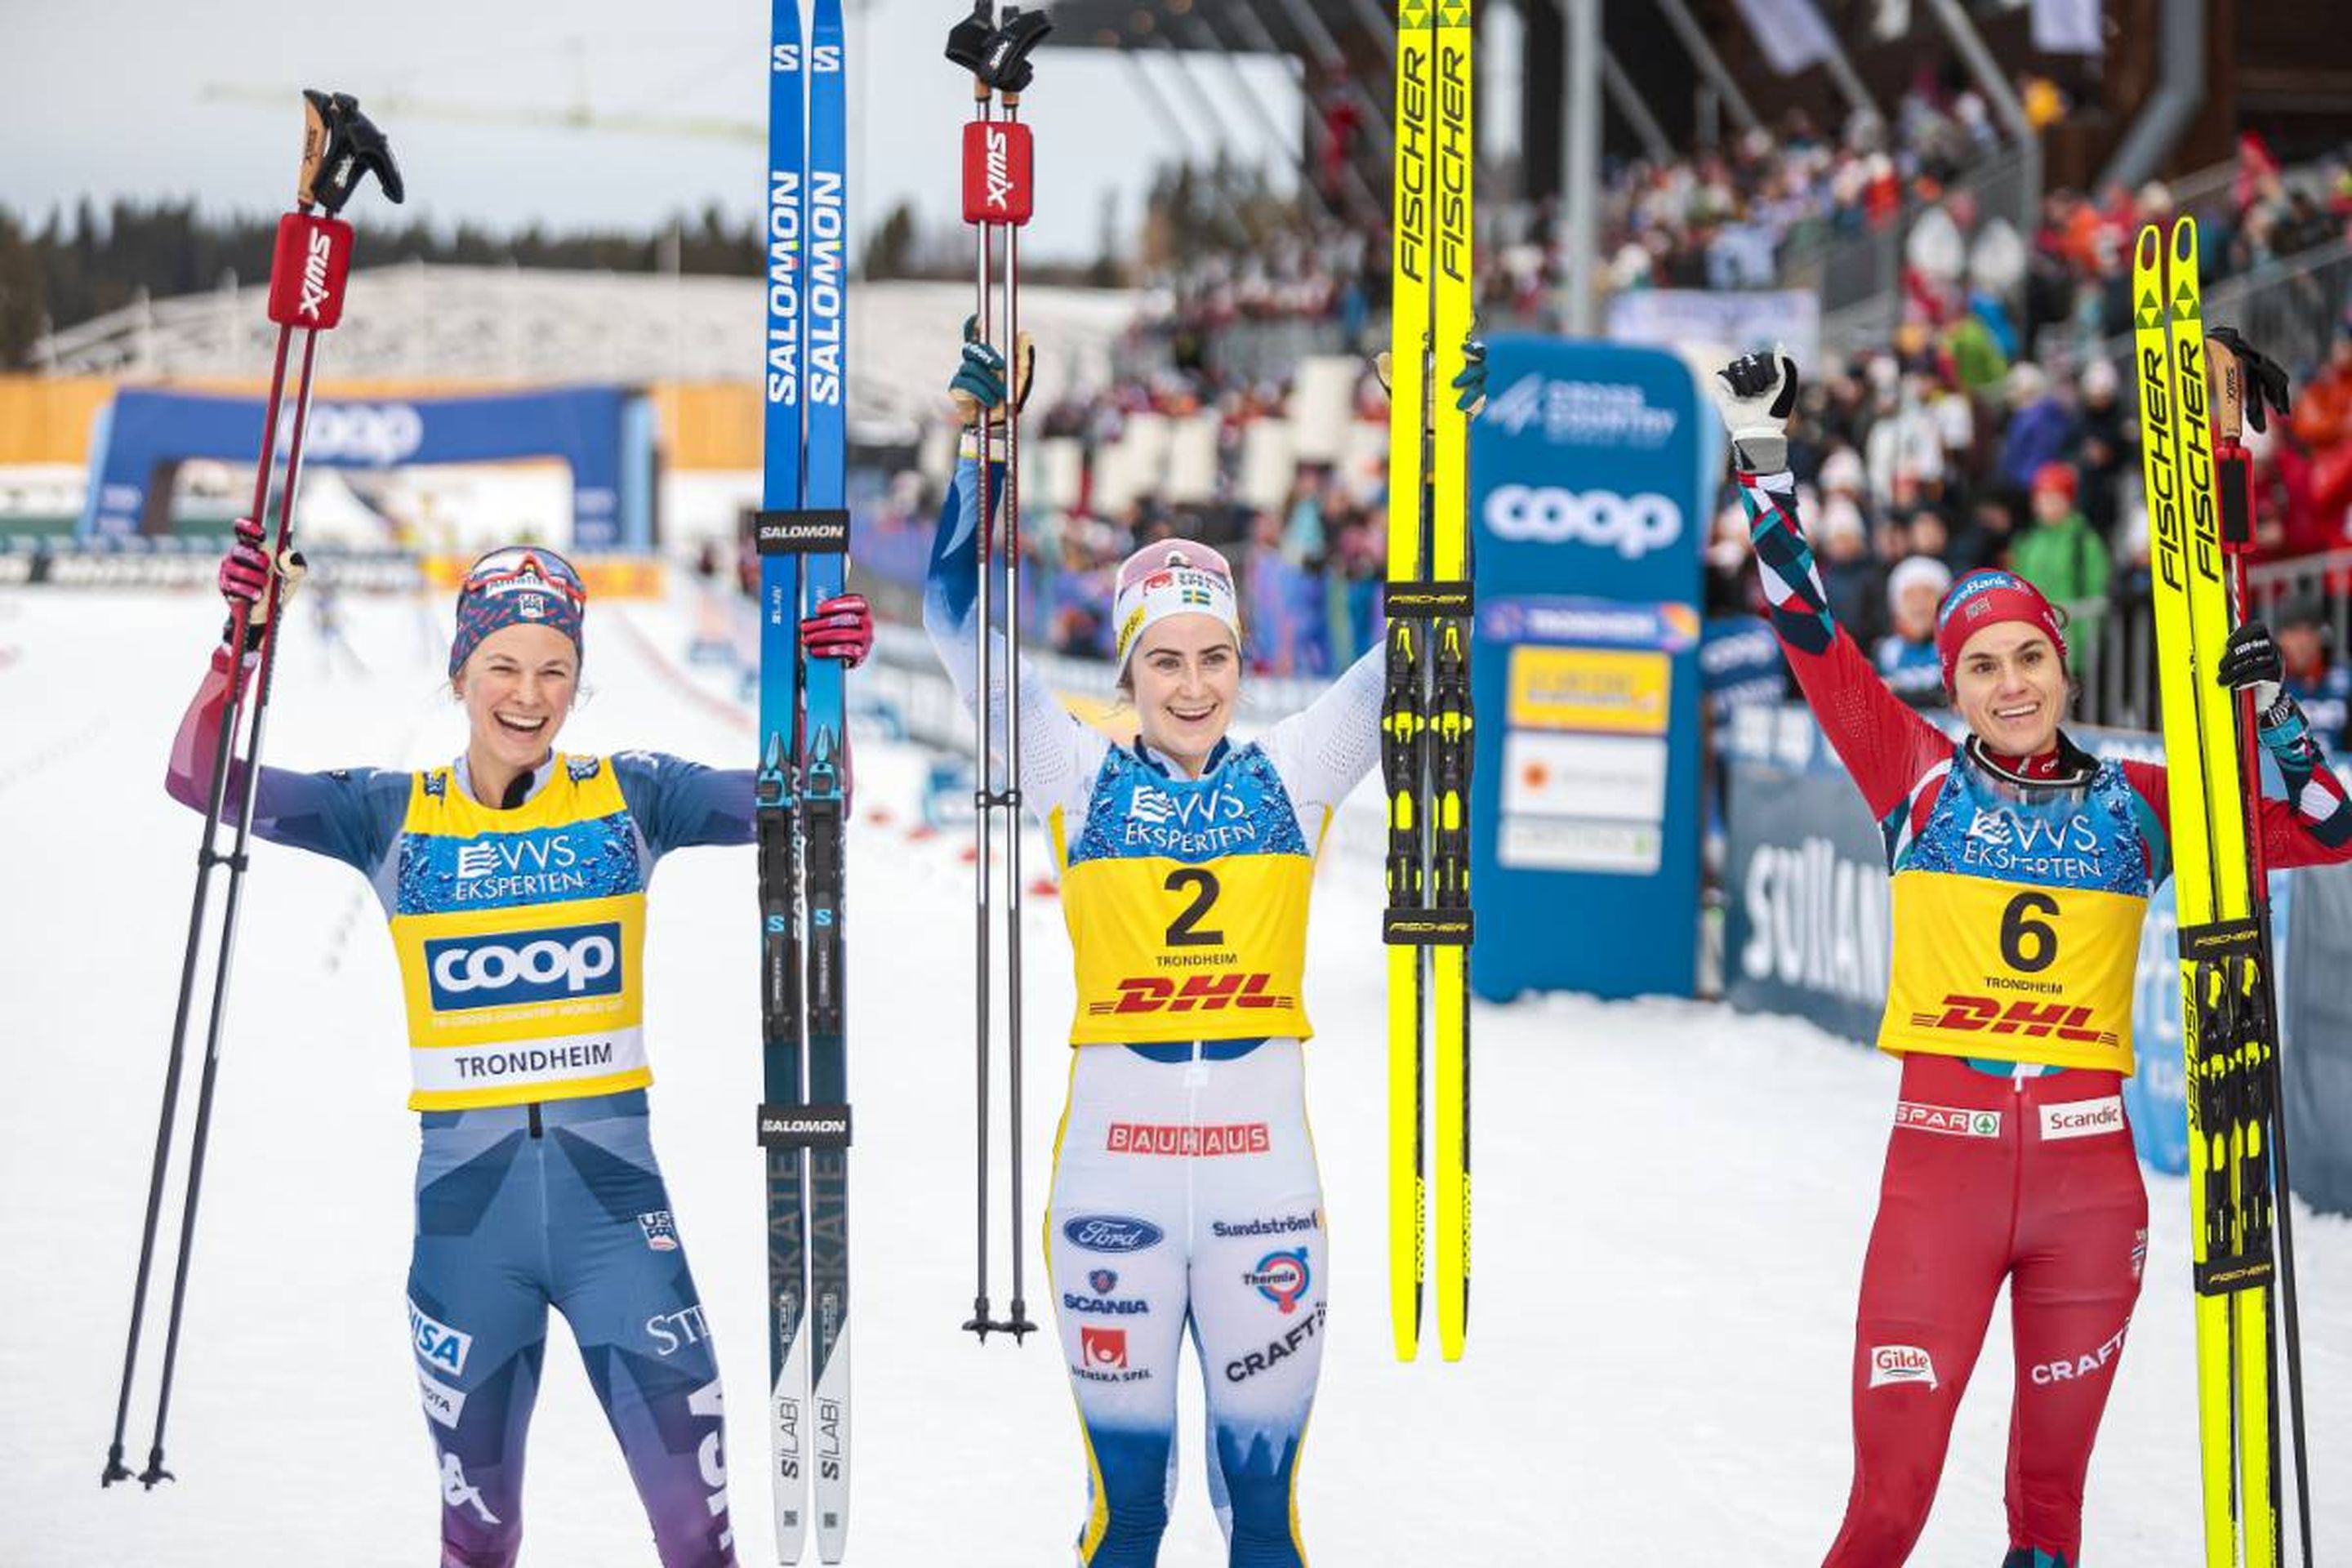 All smiles on the podium as USA's Jessie Diggins (left), Sweden's Ebba Andersson (middle) and Norway's Heidi Weng (right) celebrate their strong performances in the women's 20km skiathlon on Saturday © NordicFocus